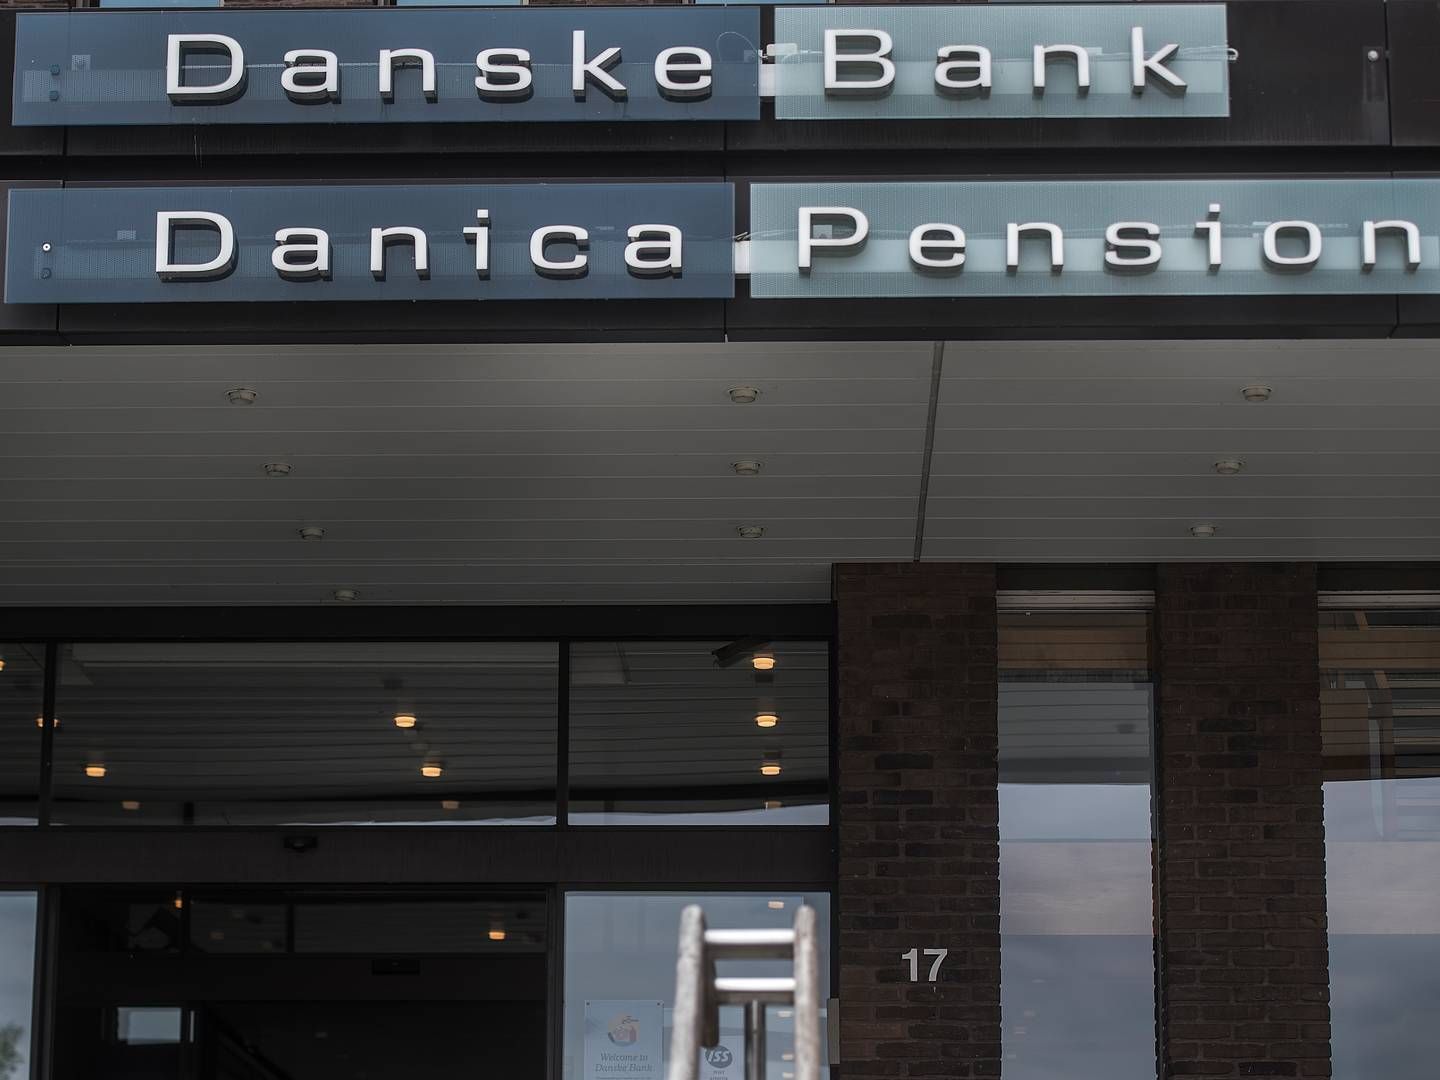 Danica Pension sees customer tendency to opt out of high-risk products . | Photo: Mogens Flindt